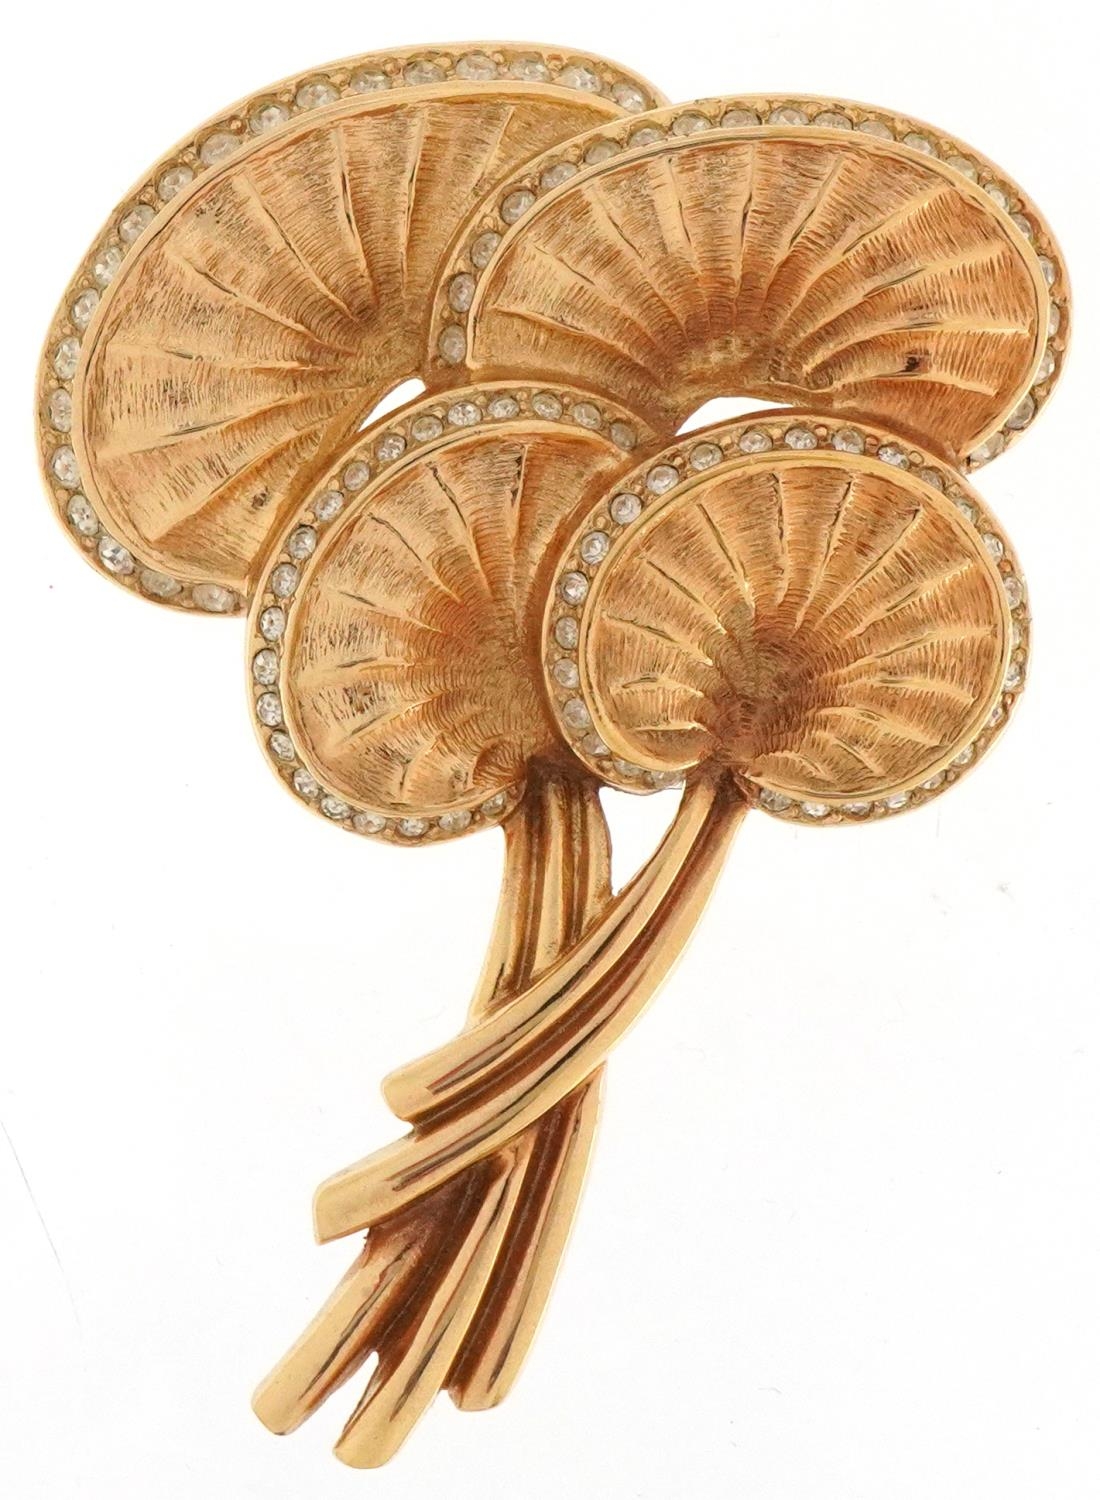 Christian Dior, gold plated and clear stone brooch in the form of palm leaves, 6.5cm high, 30.0g